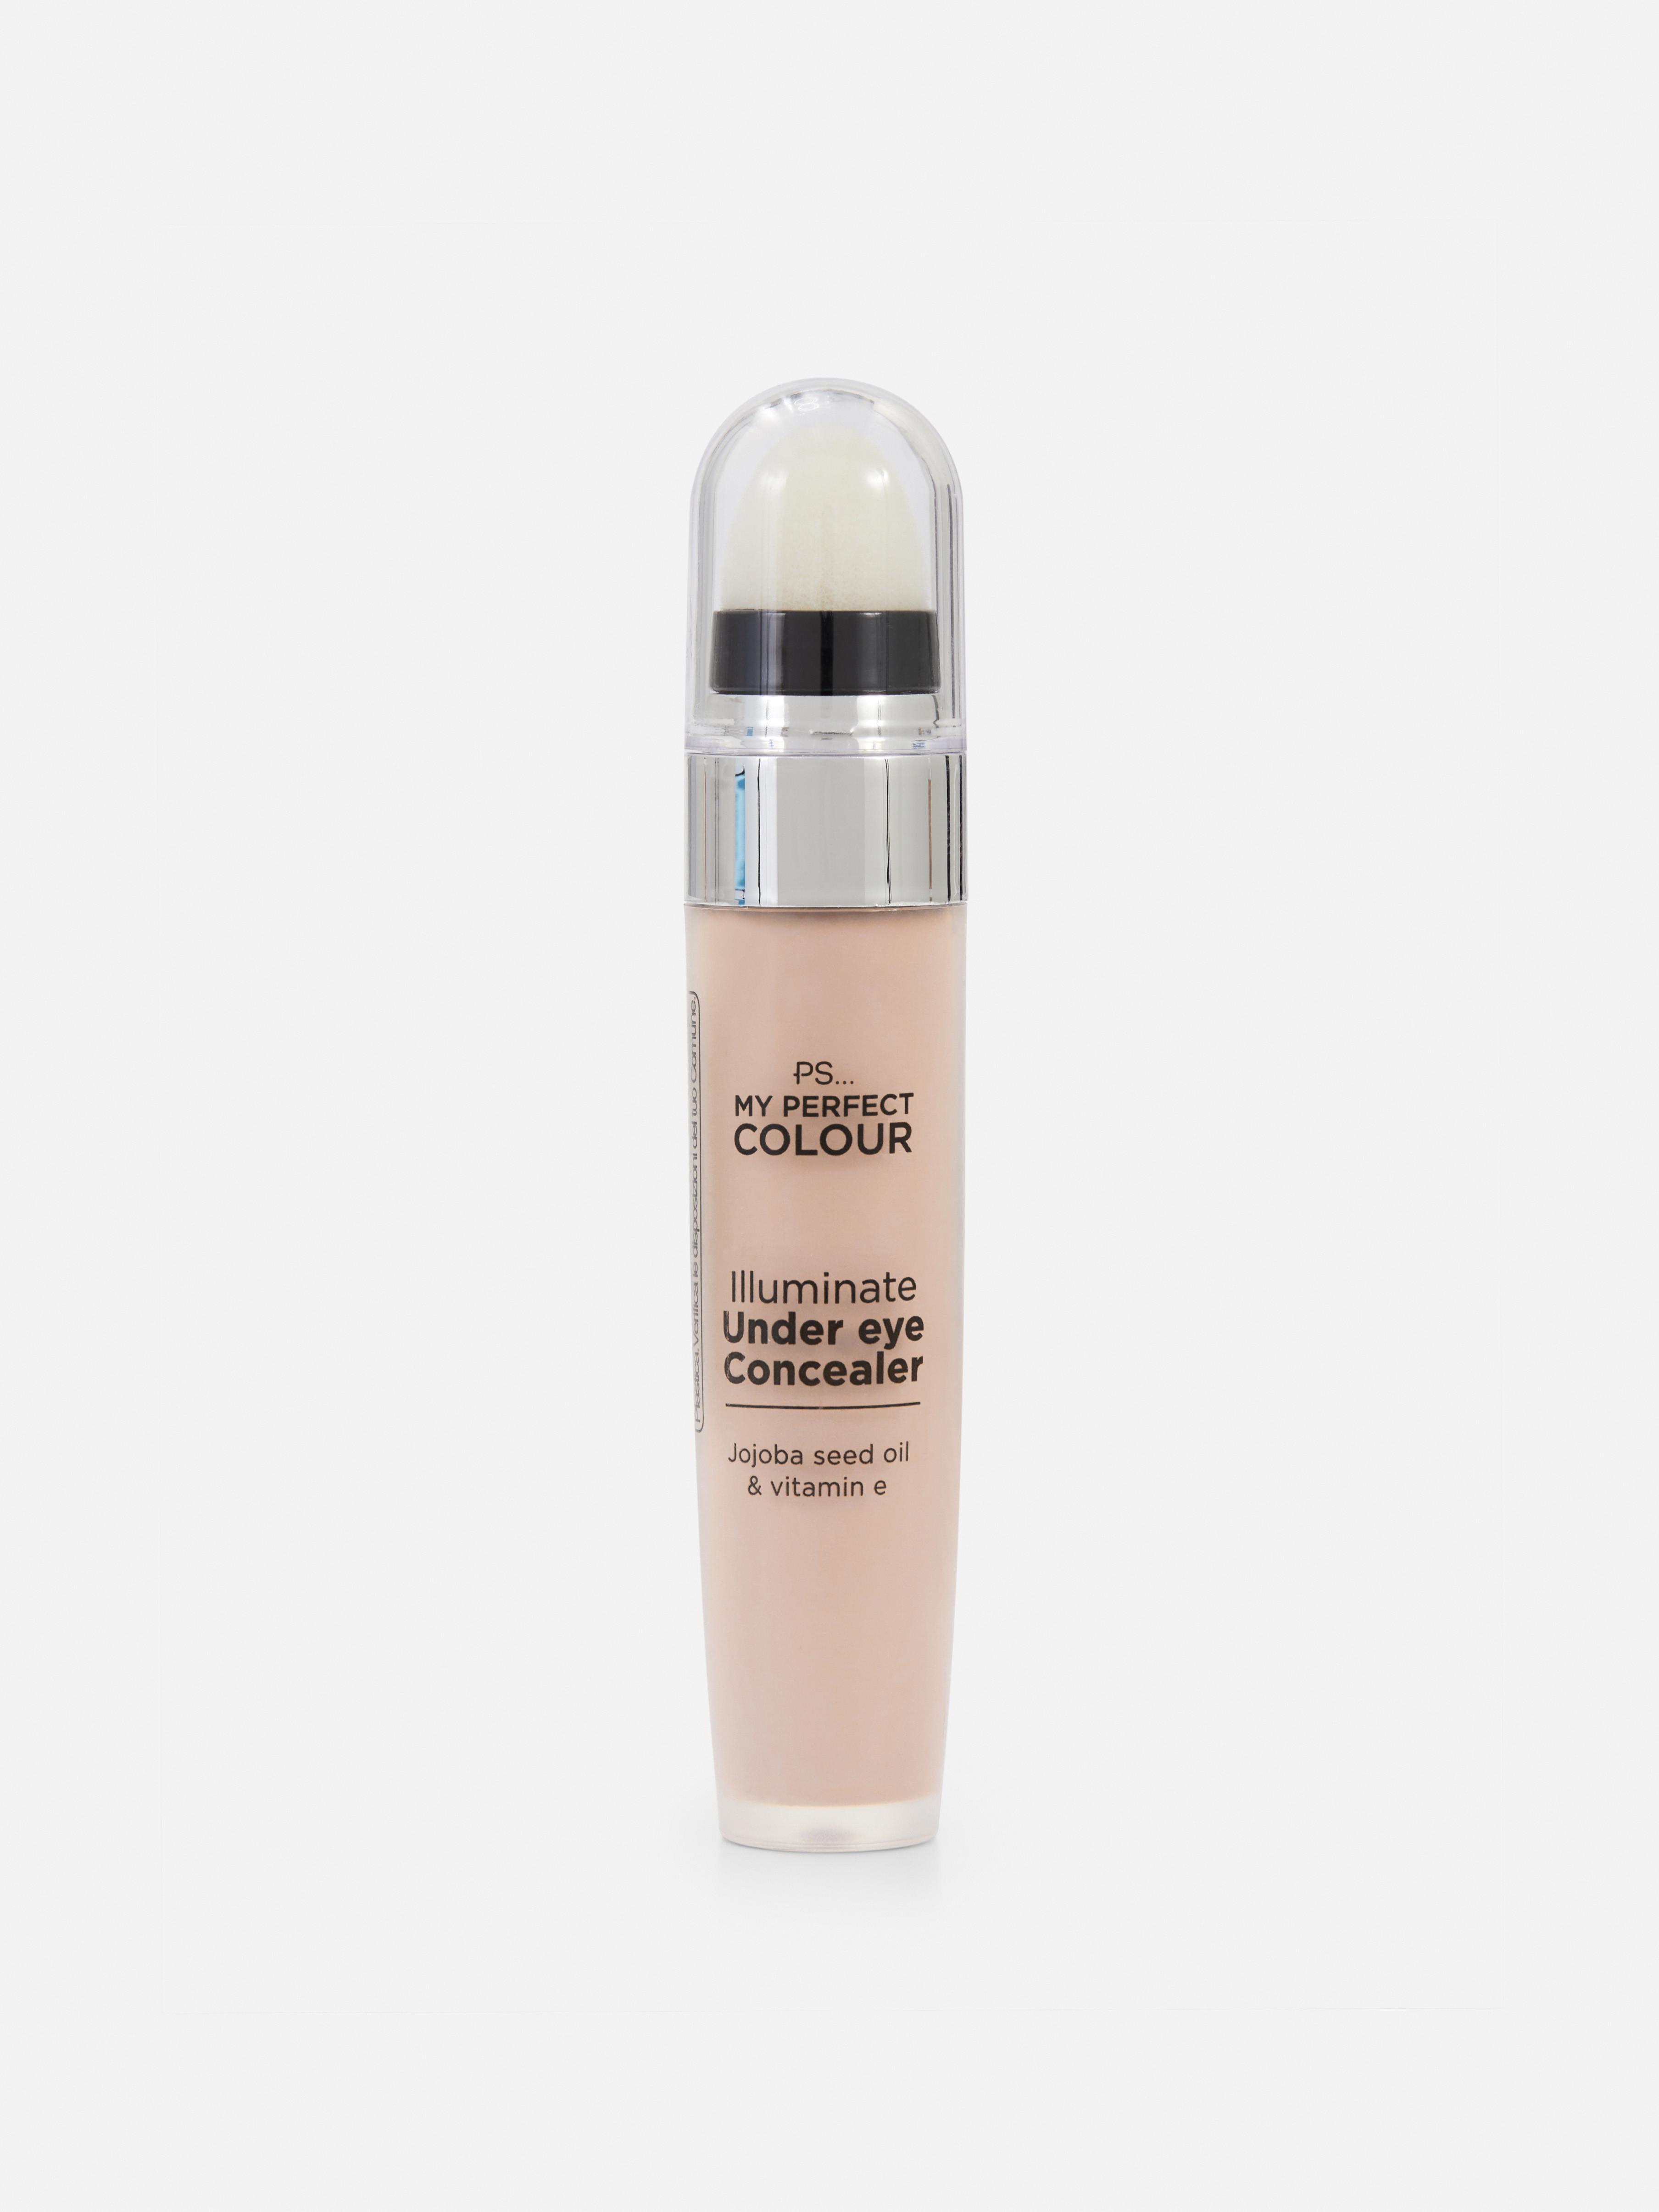 PS... My Perfect Colour Concealer Nude